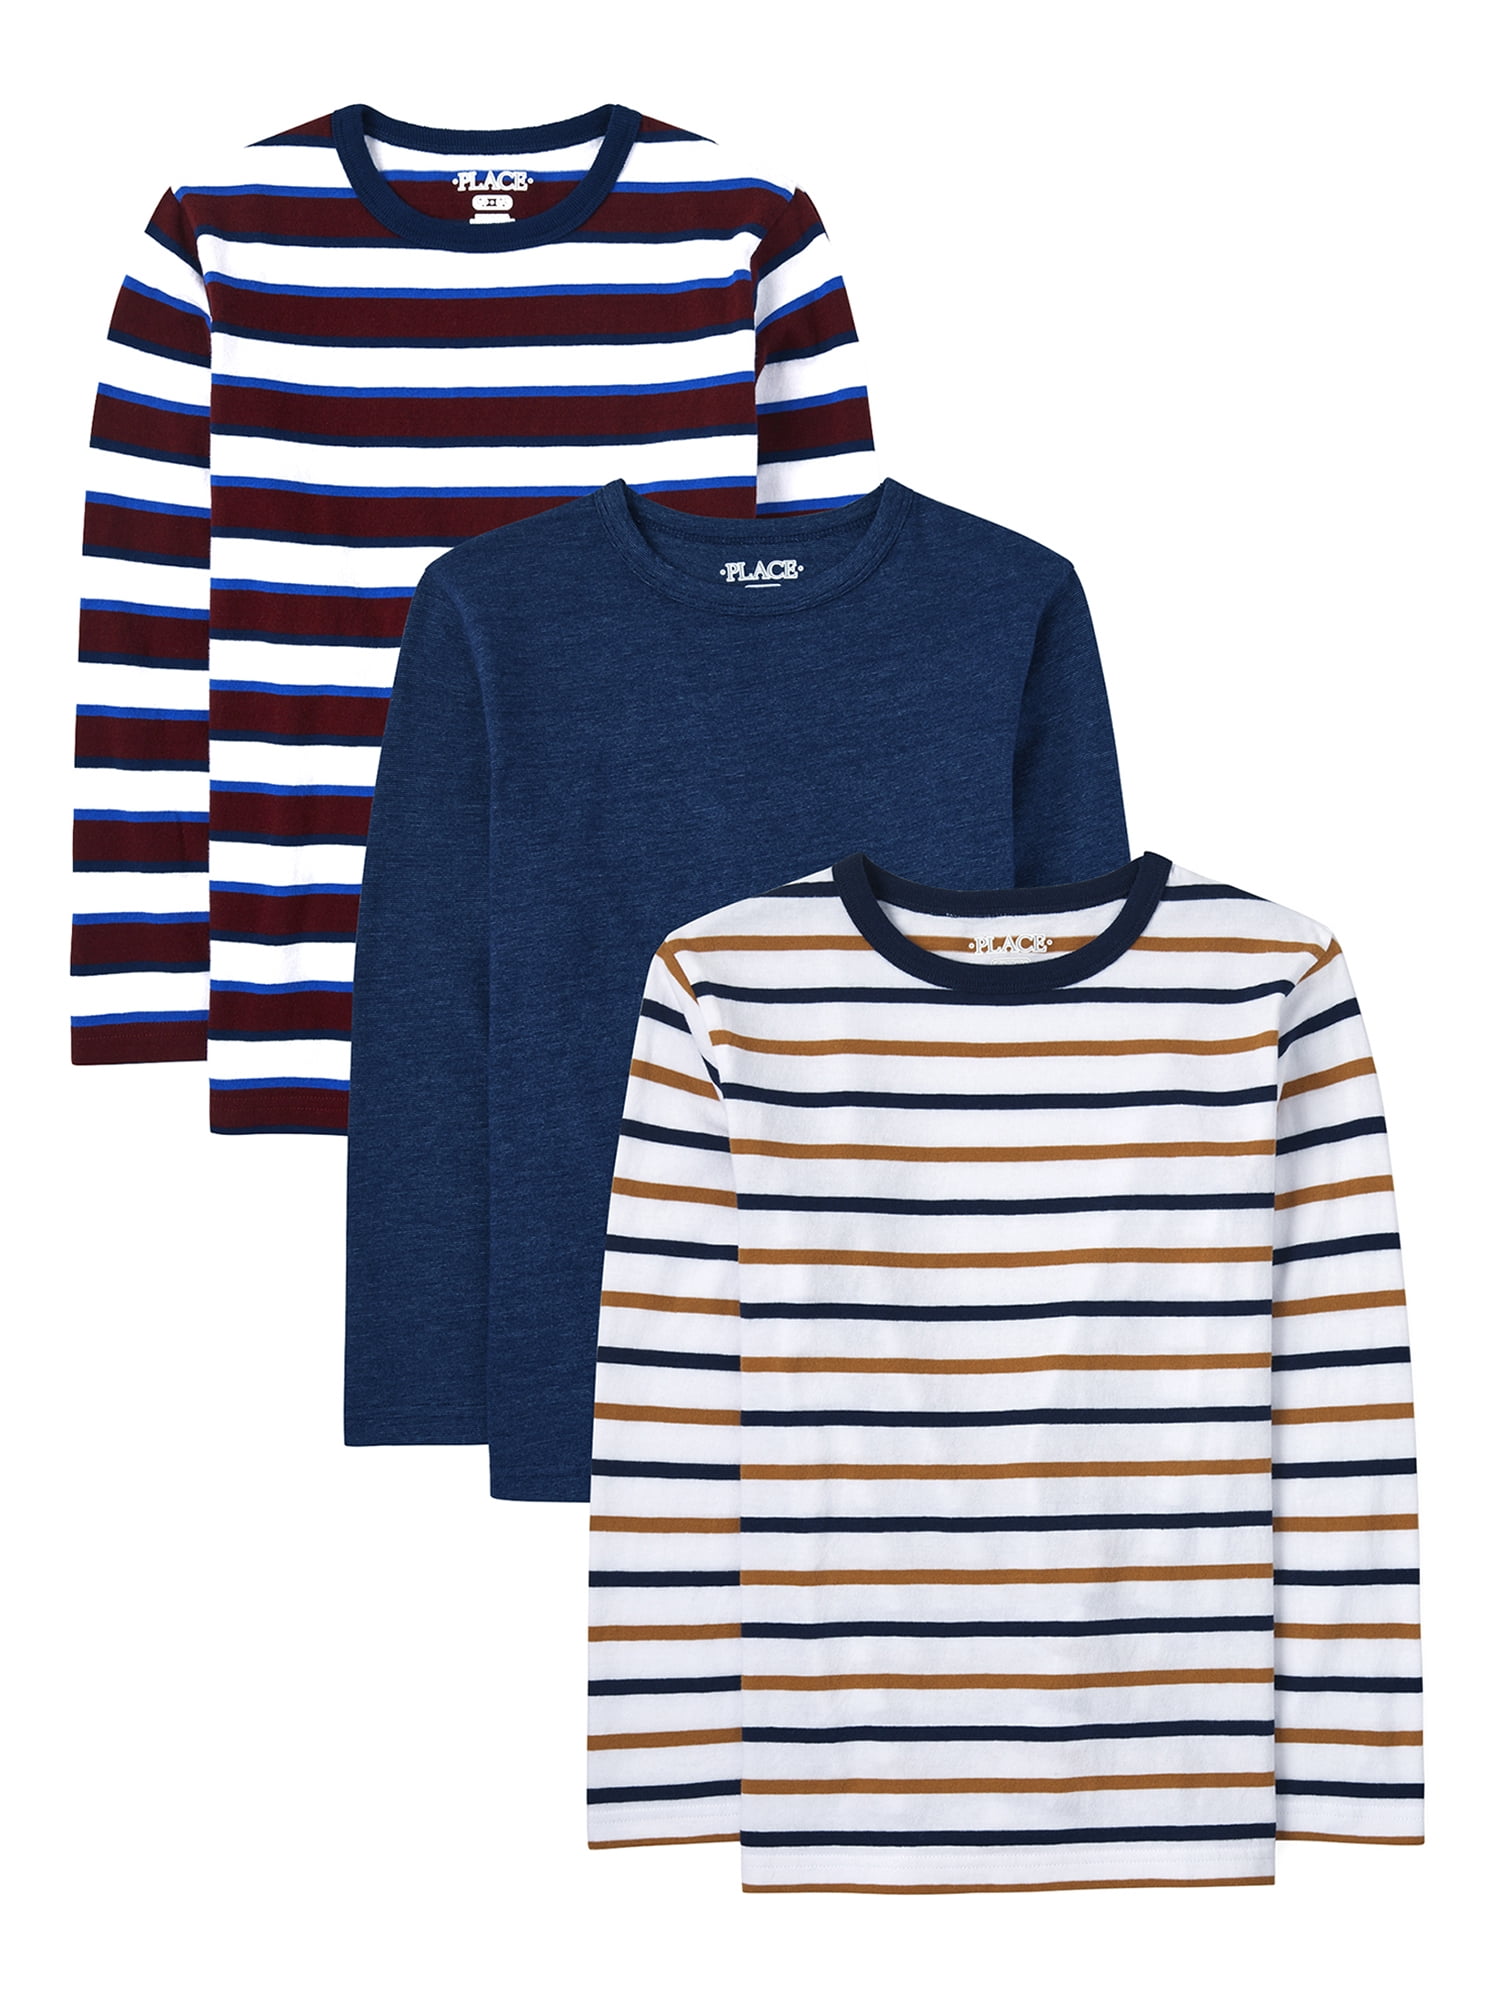 The Children's Place and Toddler Boy Long Sleeve Striped Thermal Top 3-Pack